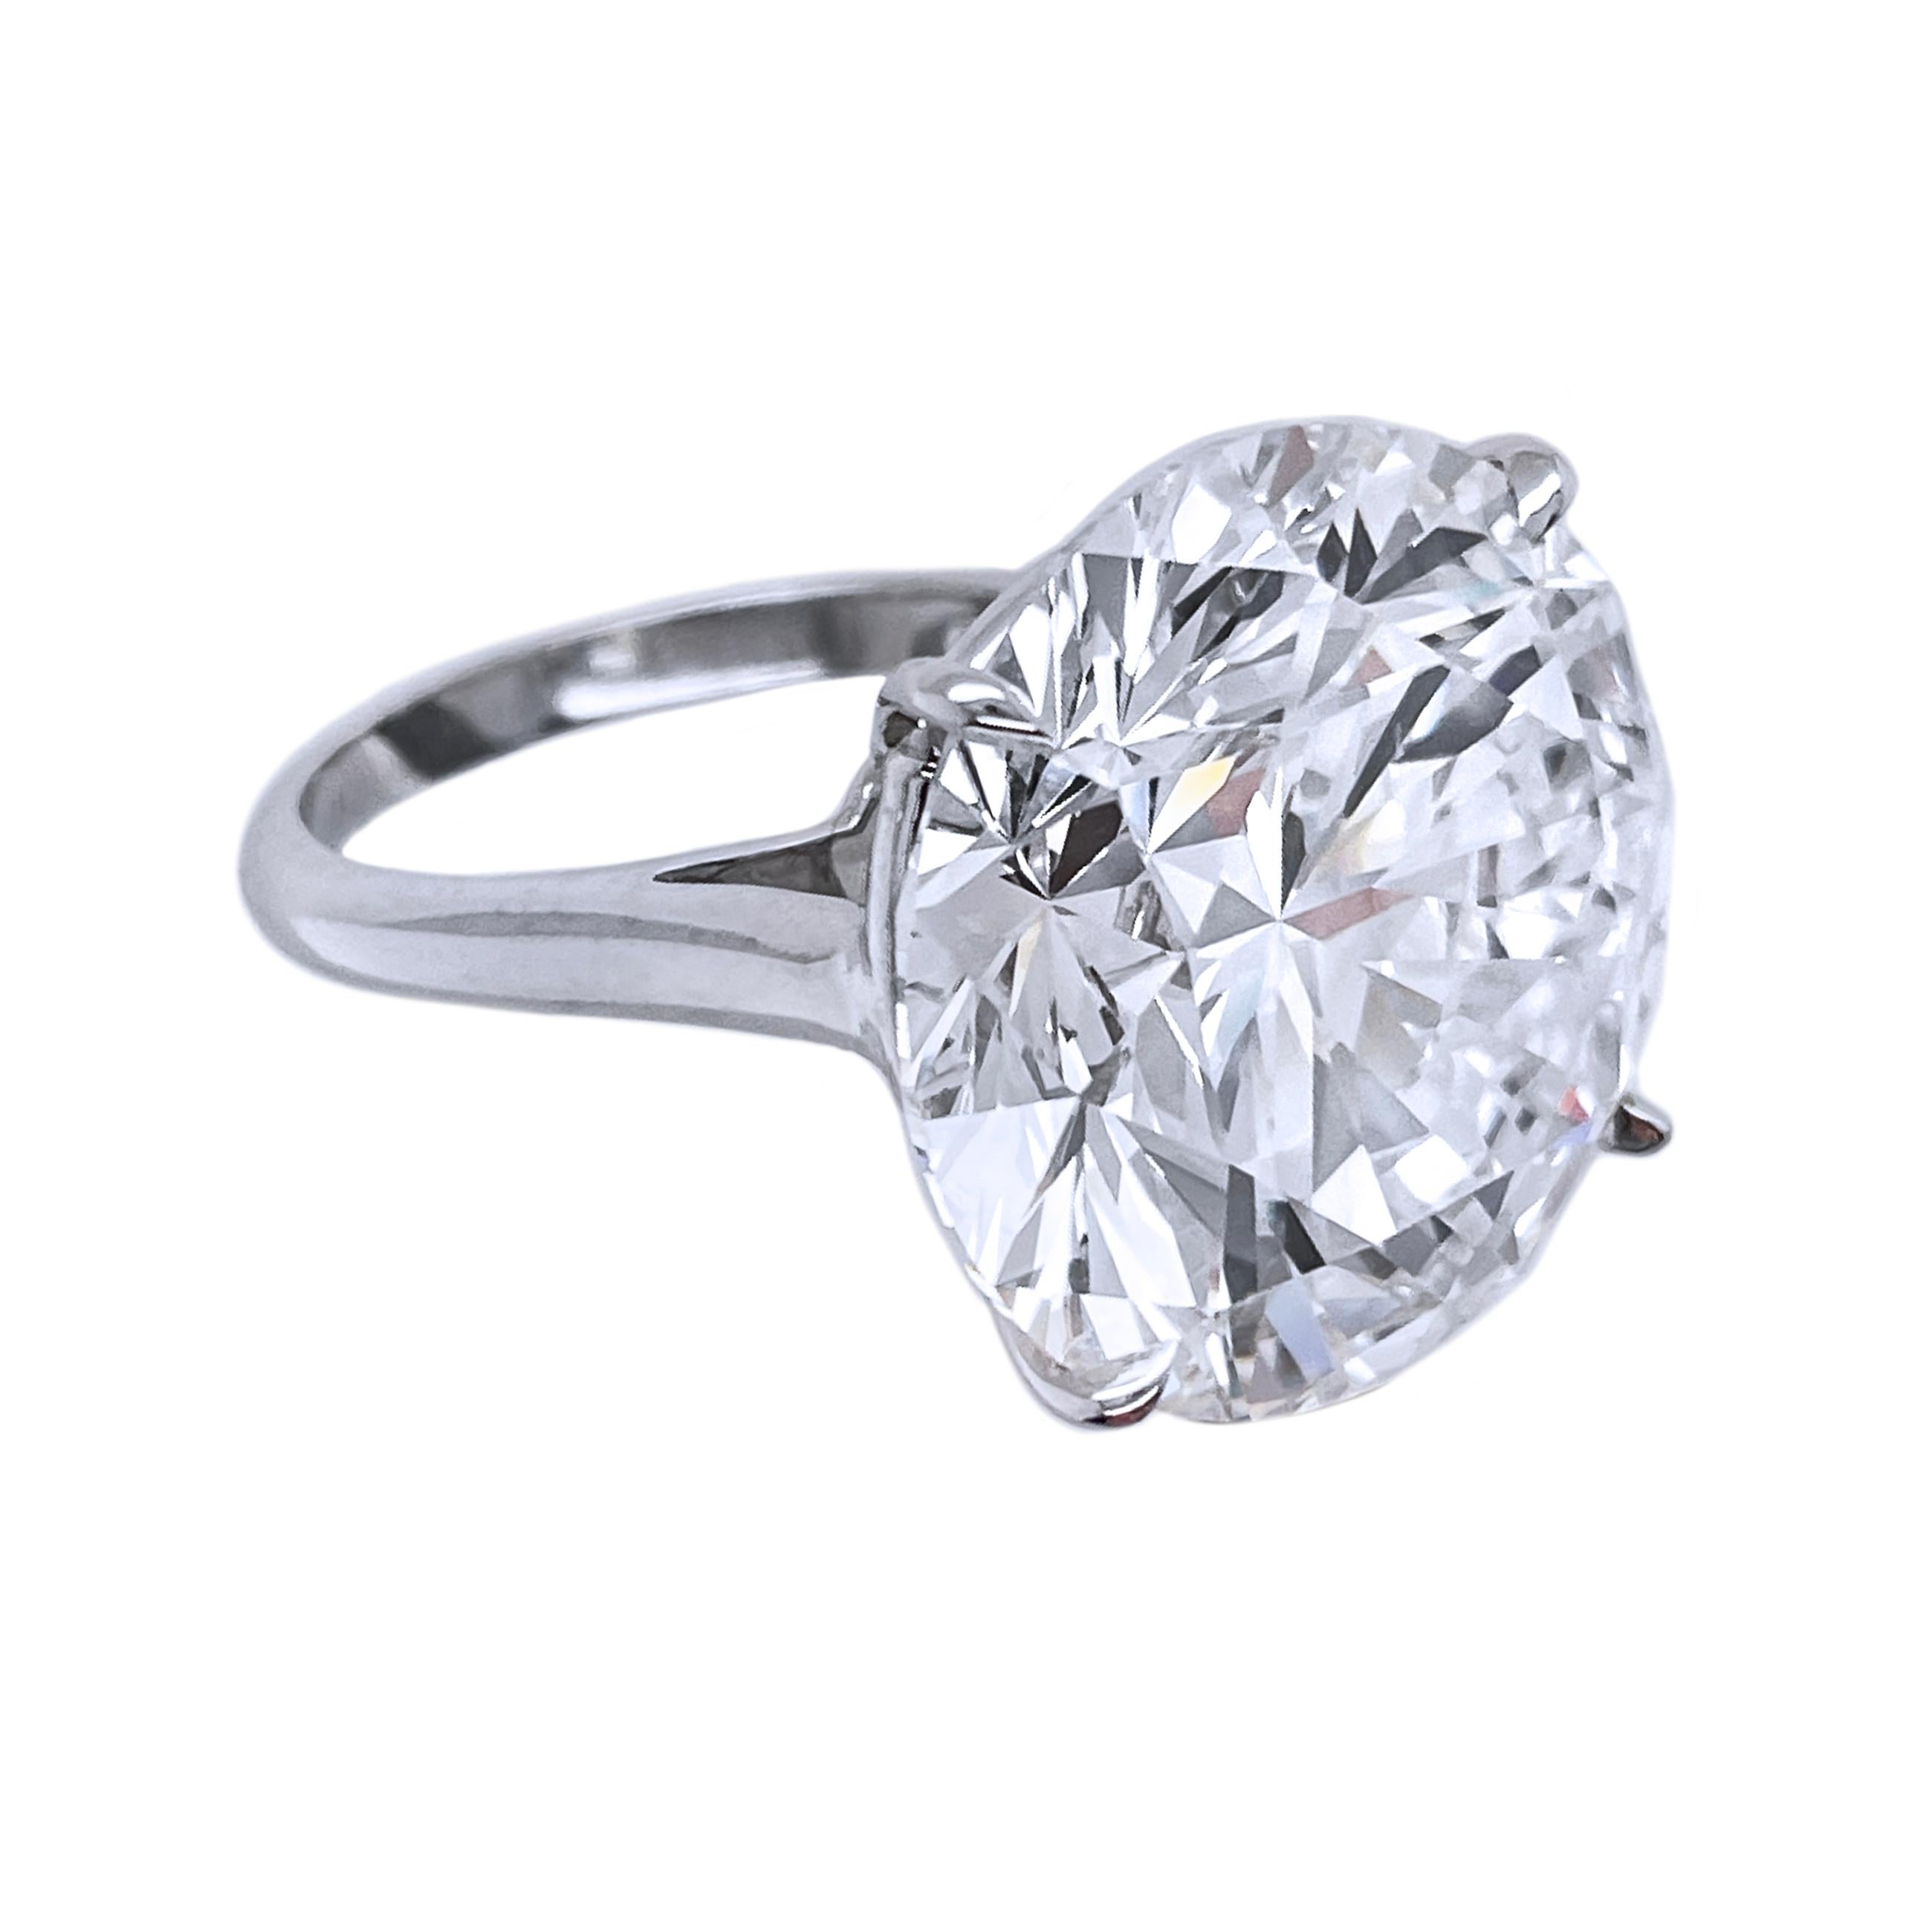 Contemporary 21.05 Carat Round Brilliant Cut Diamond Ring, GIA Certified For Sale